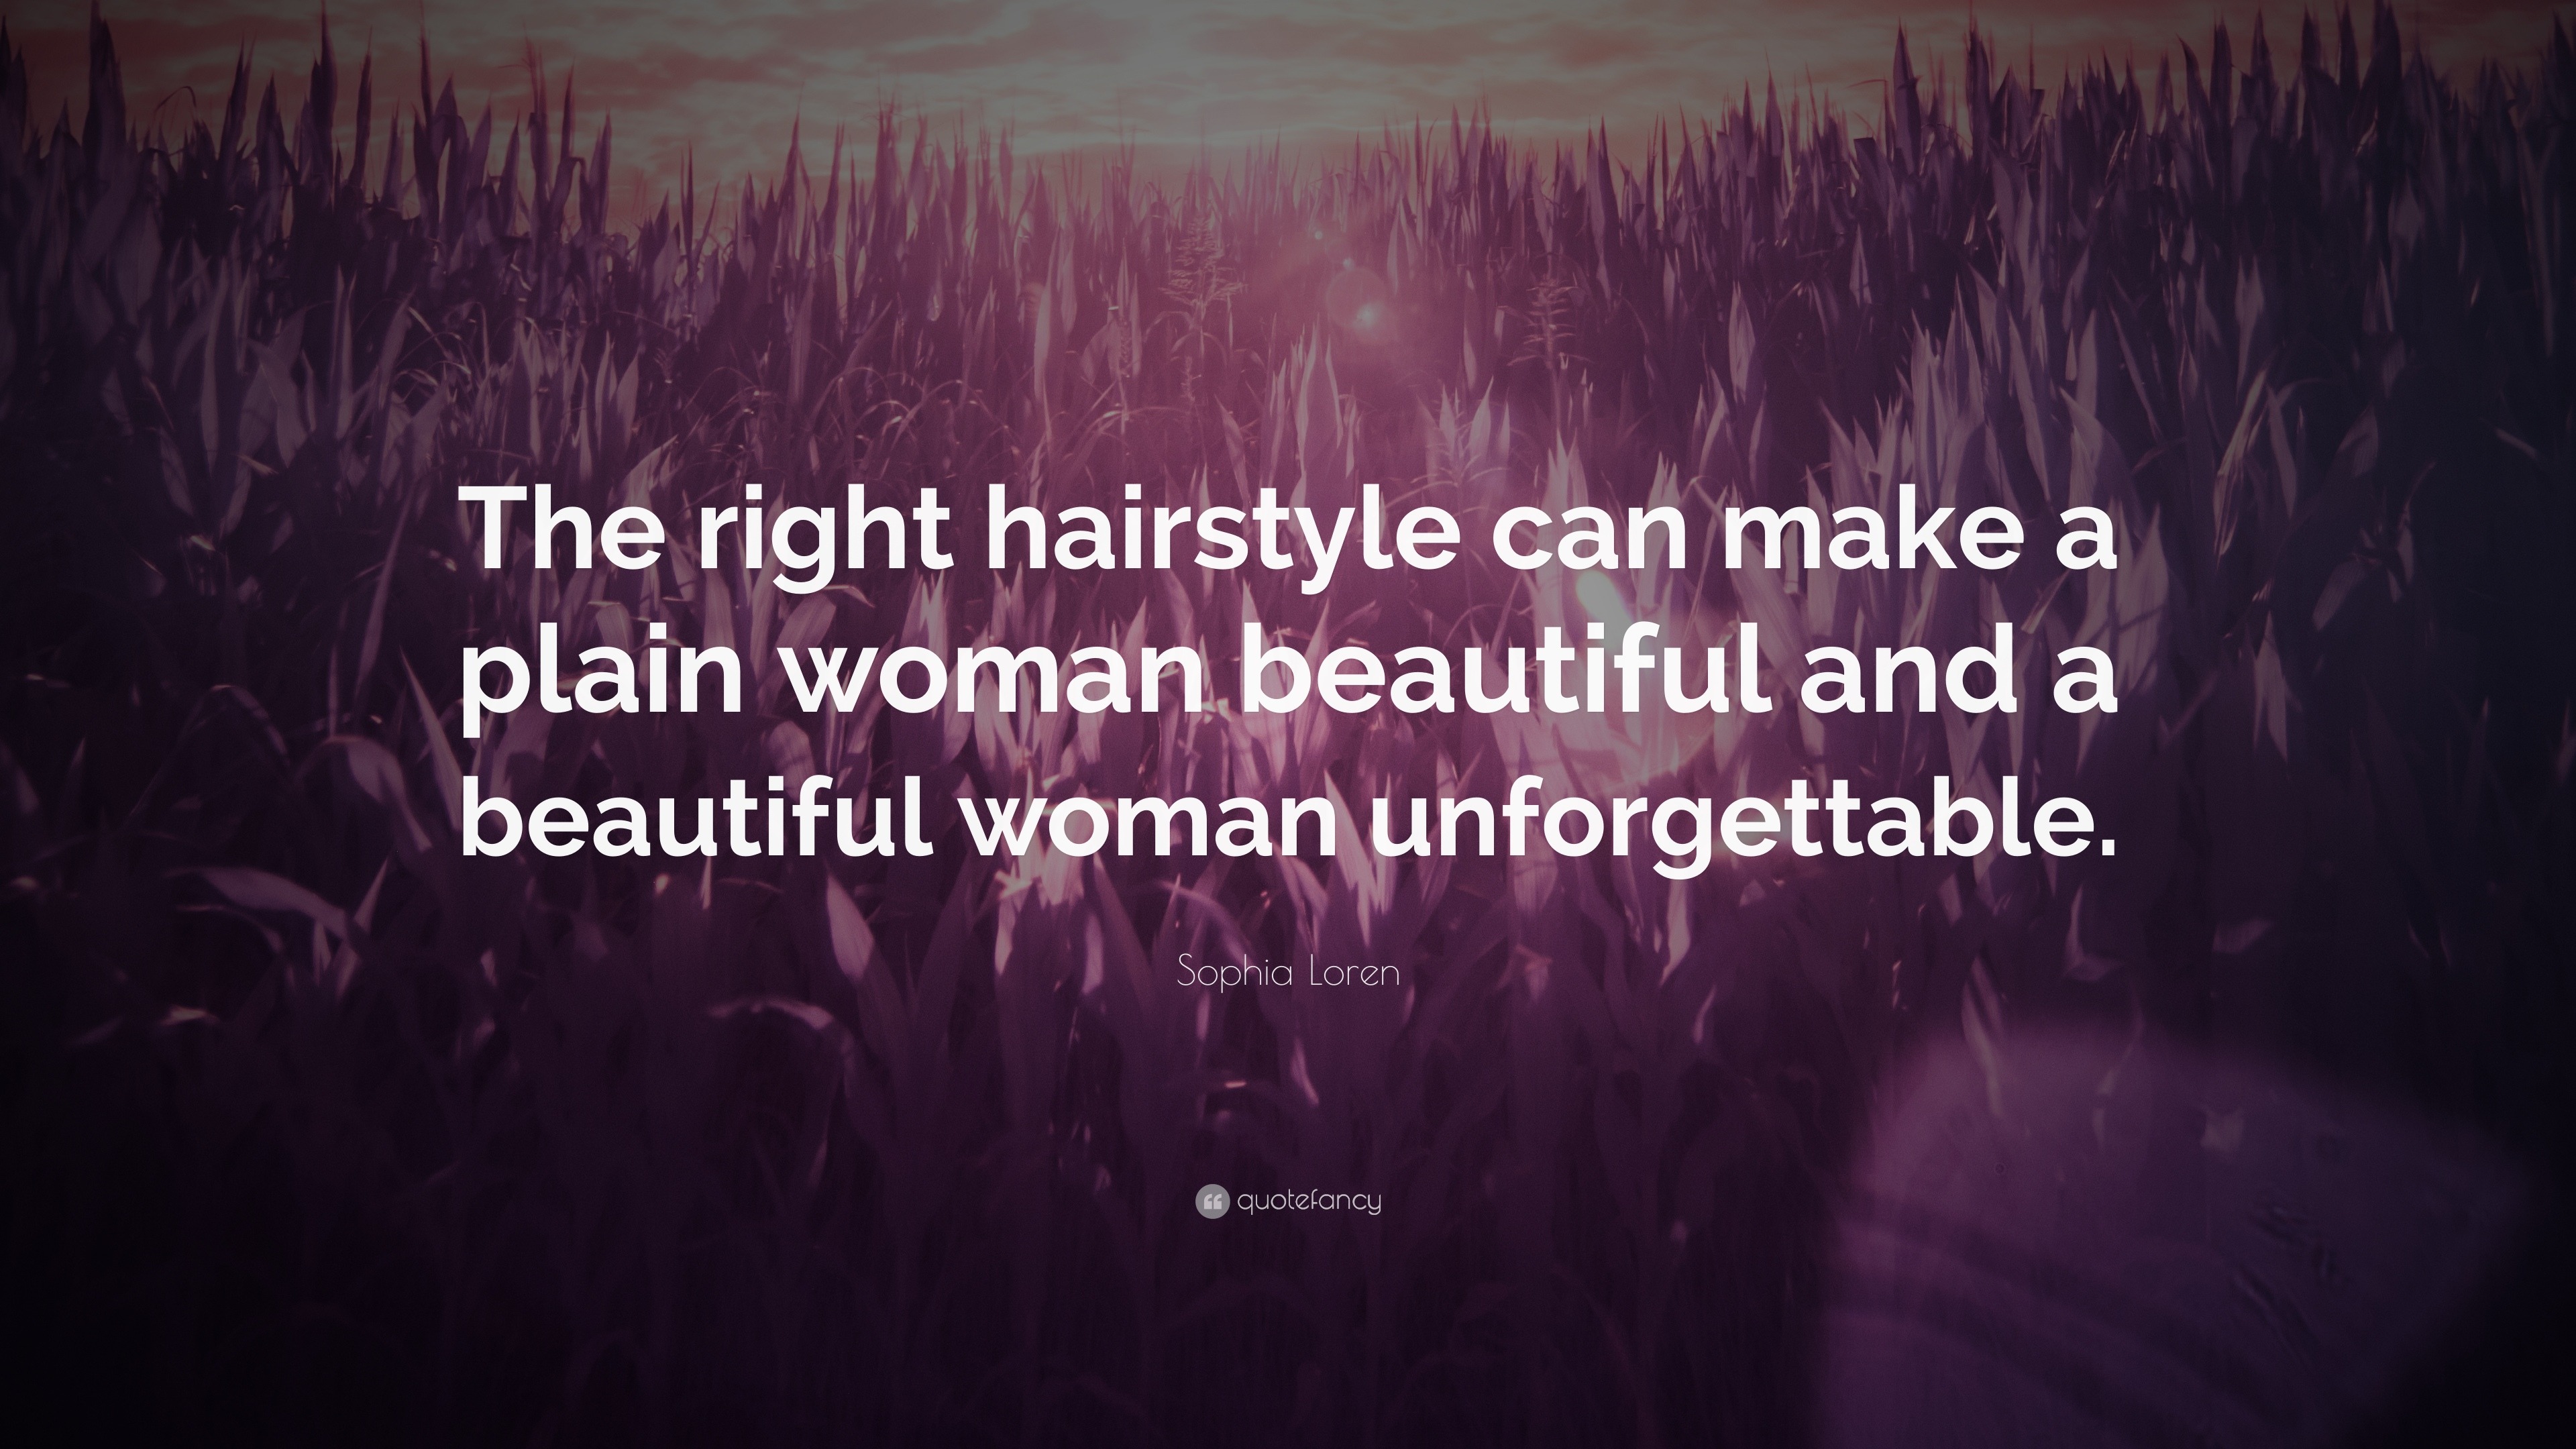 Short Hair Quotes: Best Captions for Your Hair Selfies | All Things Hair PH